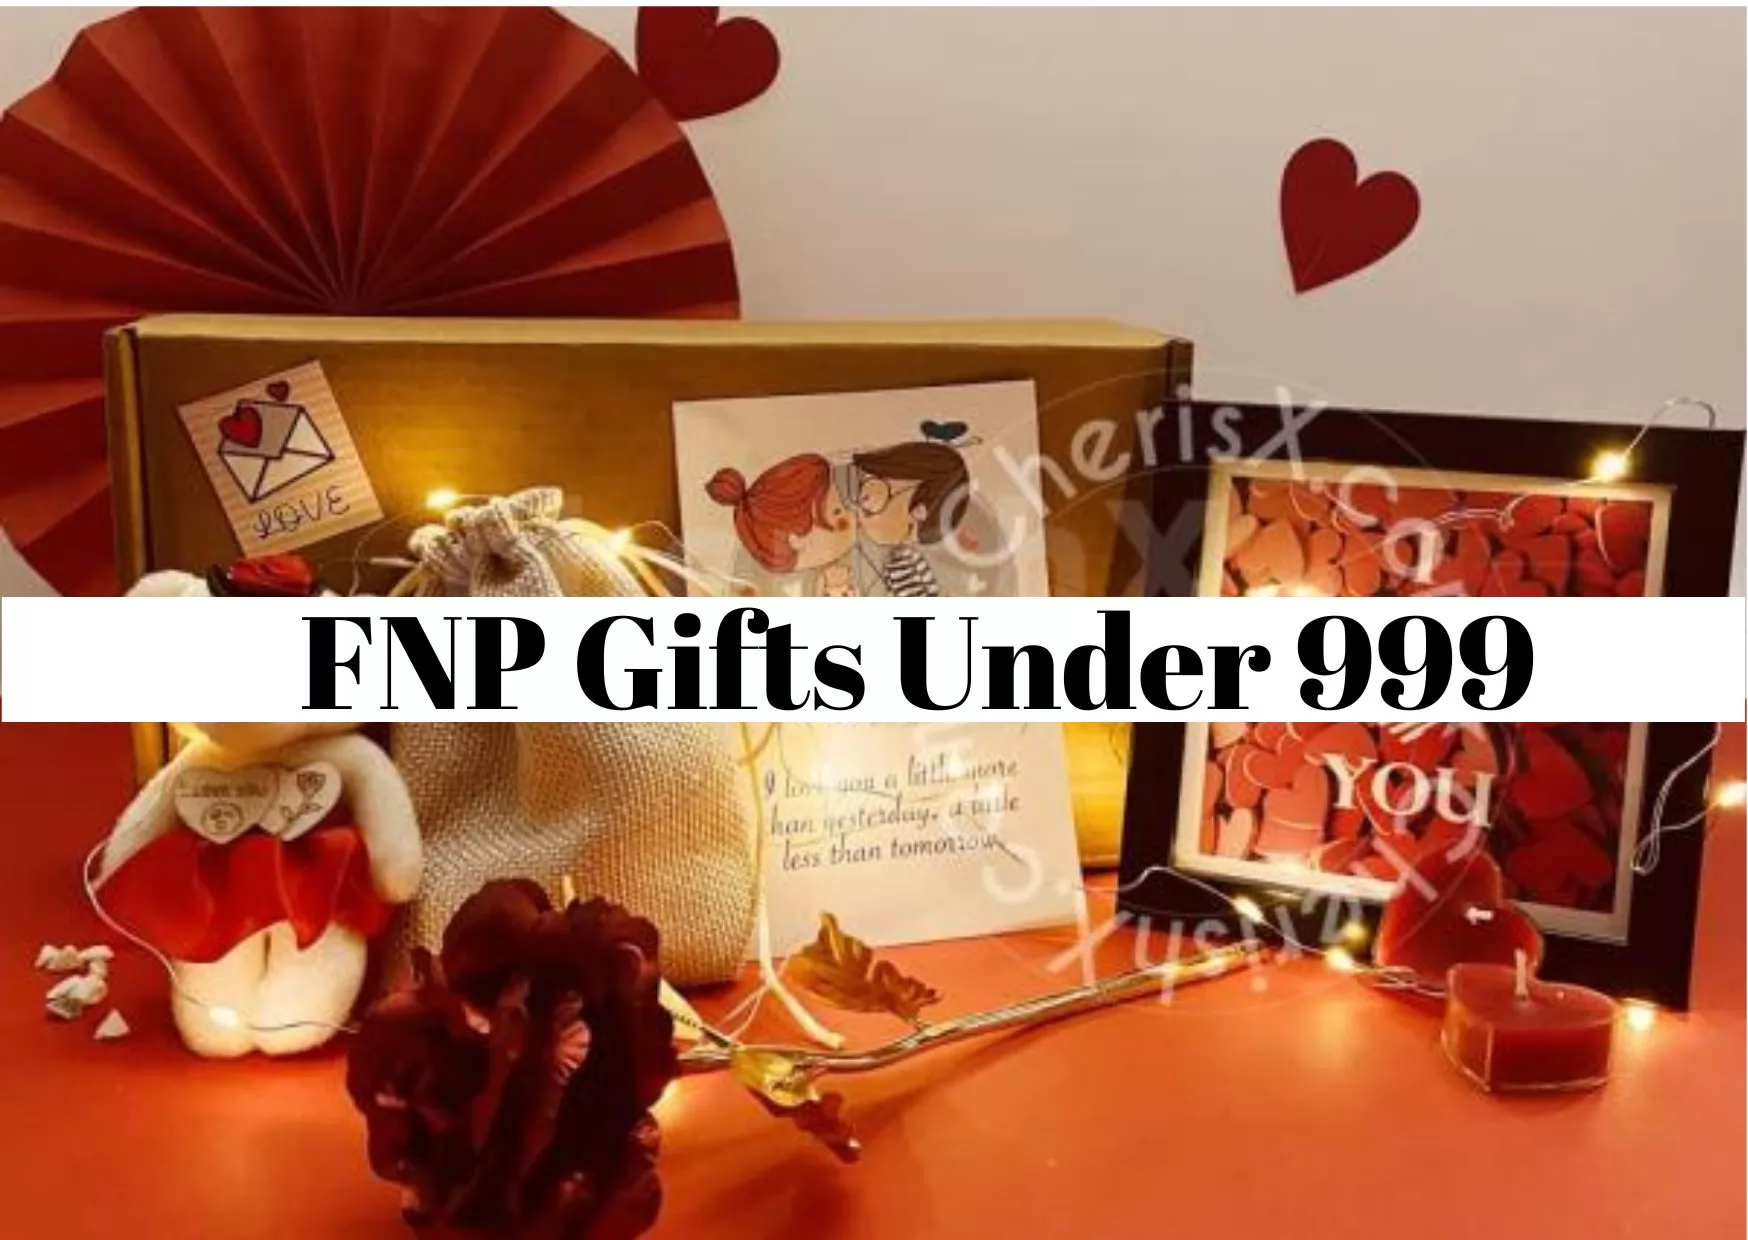 FNP Gifts Under 999